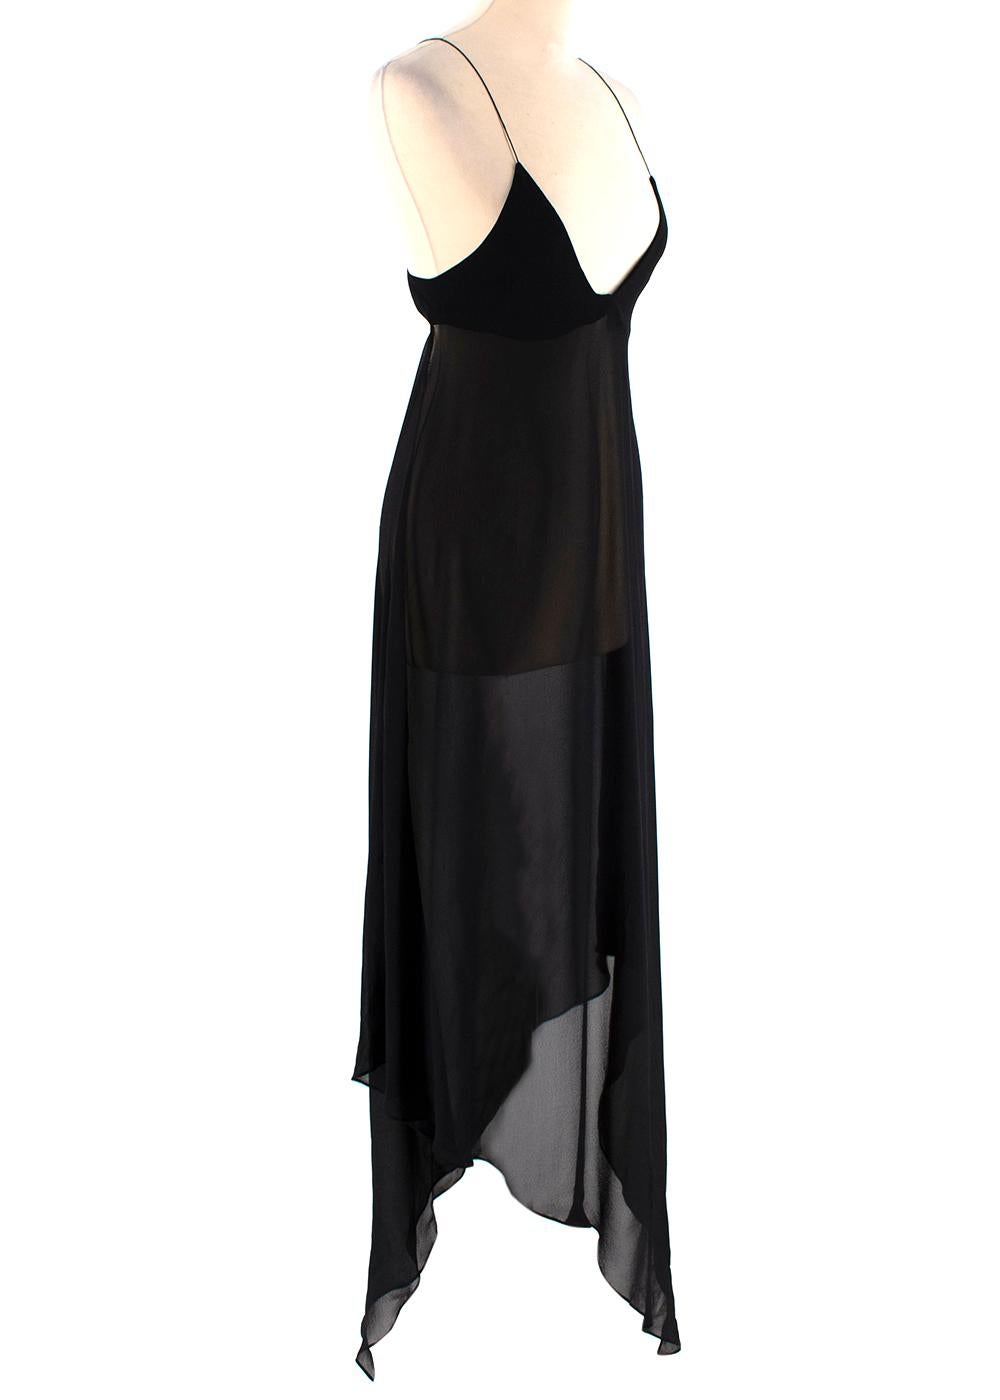 Saint Laurent Sheer Black Asymmetric Sleeveless Dress - 0-2 In Excellent Condition For Sale In London, GB